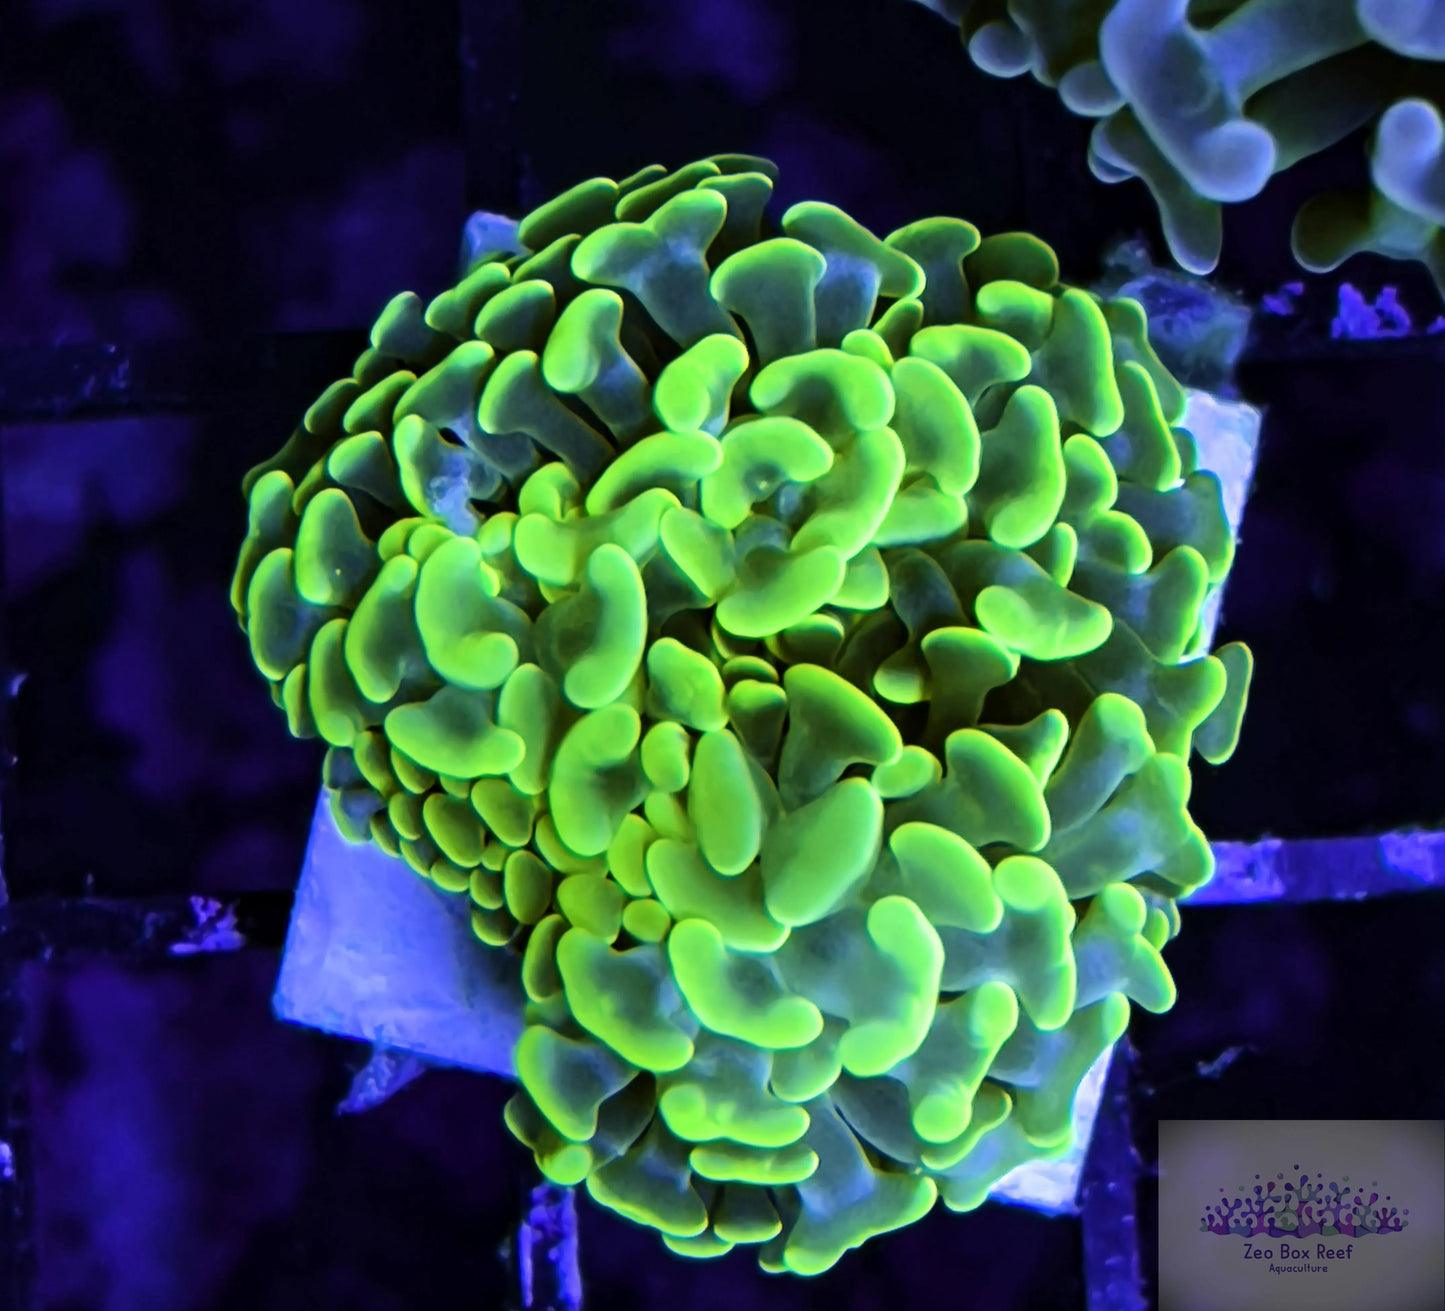 Euphyllia ancora Coral- LPS - Ultra Toxic Green Hammer Euphyllia ancora Coral- LPS - Ultra Toxic Green Hammer  Euphyllia ancora Coral- LPS - Ultra Toxic Green Hammer Zeo Box Reef